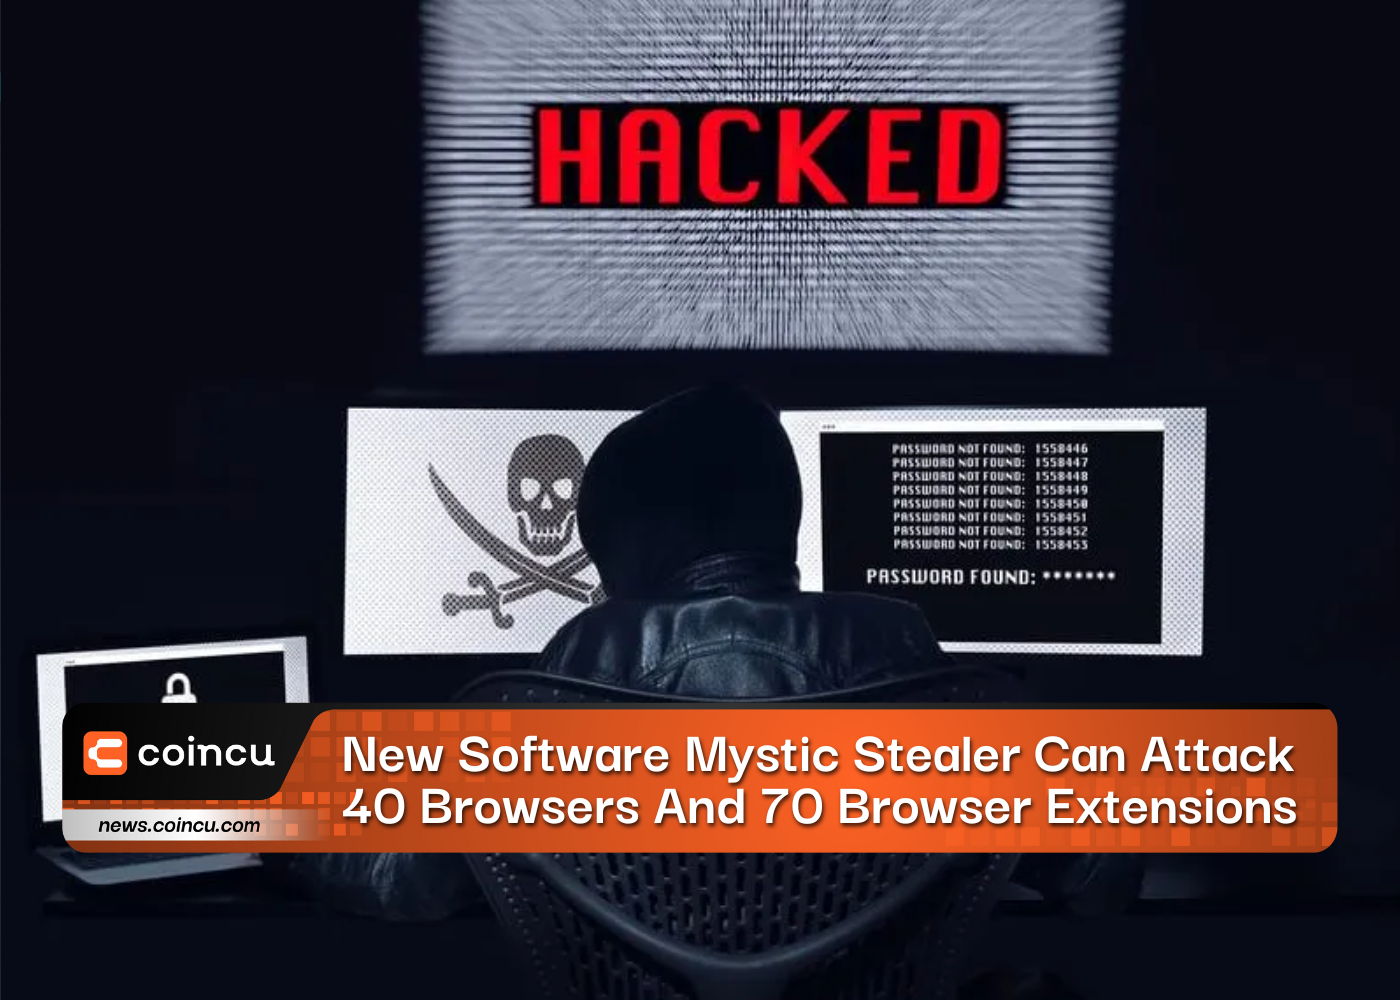 New Software Mystic Stealer Can Attack 40 Browsers And 70 Browser Extensions